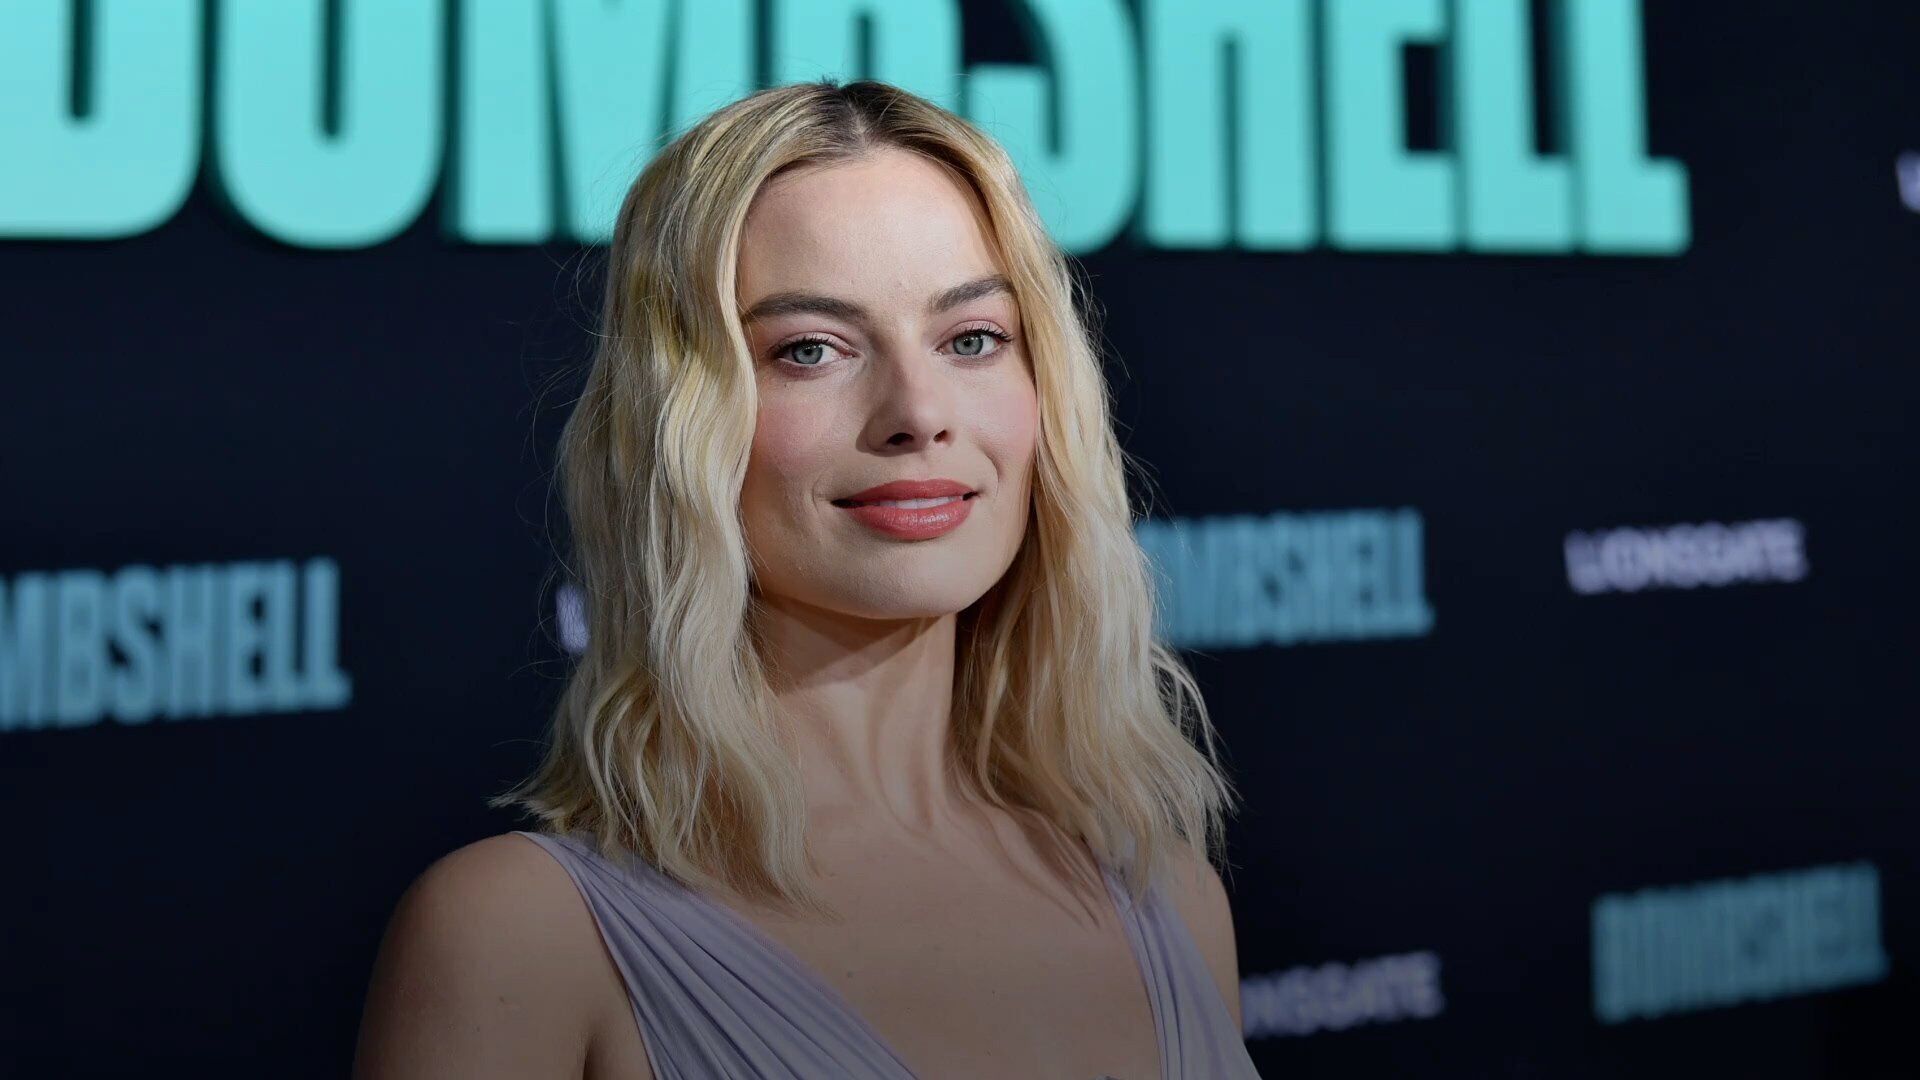 Margot Robbie didnt know the definition of sexual harassment until making Bombshell